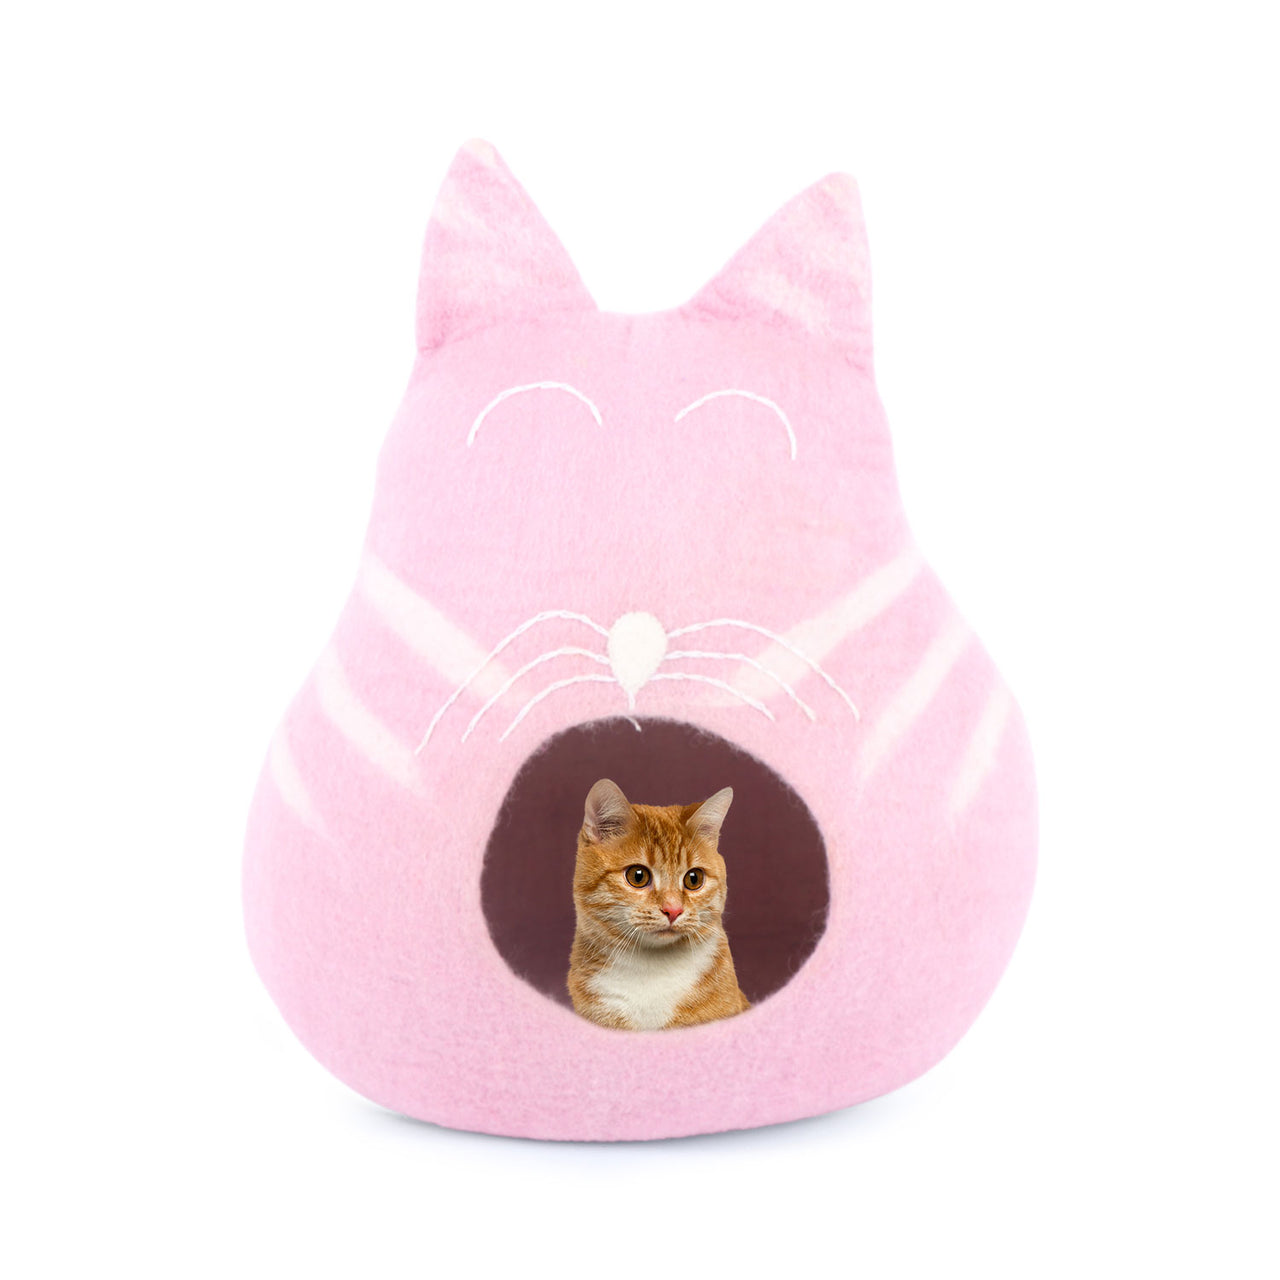 Felt and wool Premium Felt Cat Bed Cave - Handmade 100% Merino Wool Bed for Cats and Kittens